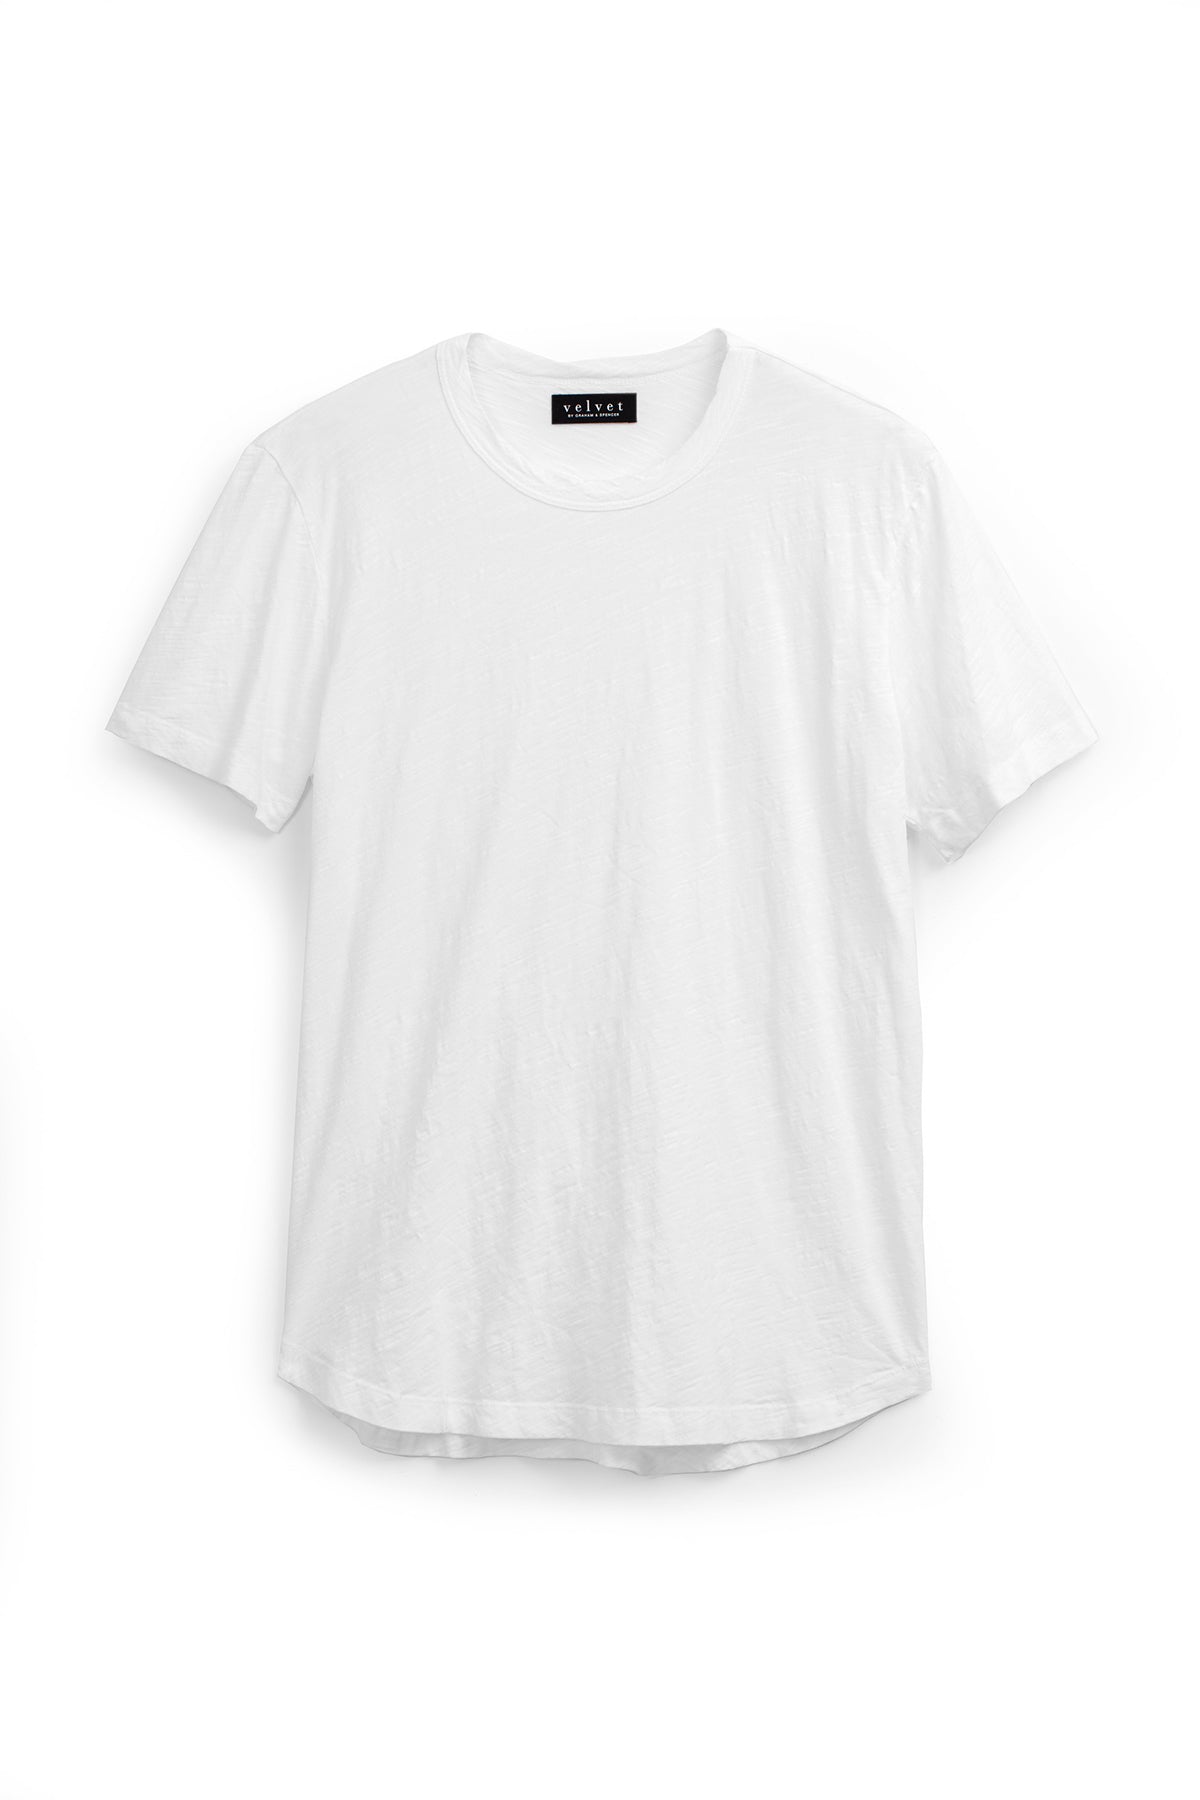 The Velvet by Graham & Spencer AMARO TEE displayed on a white background.-25217534951617